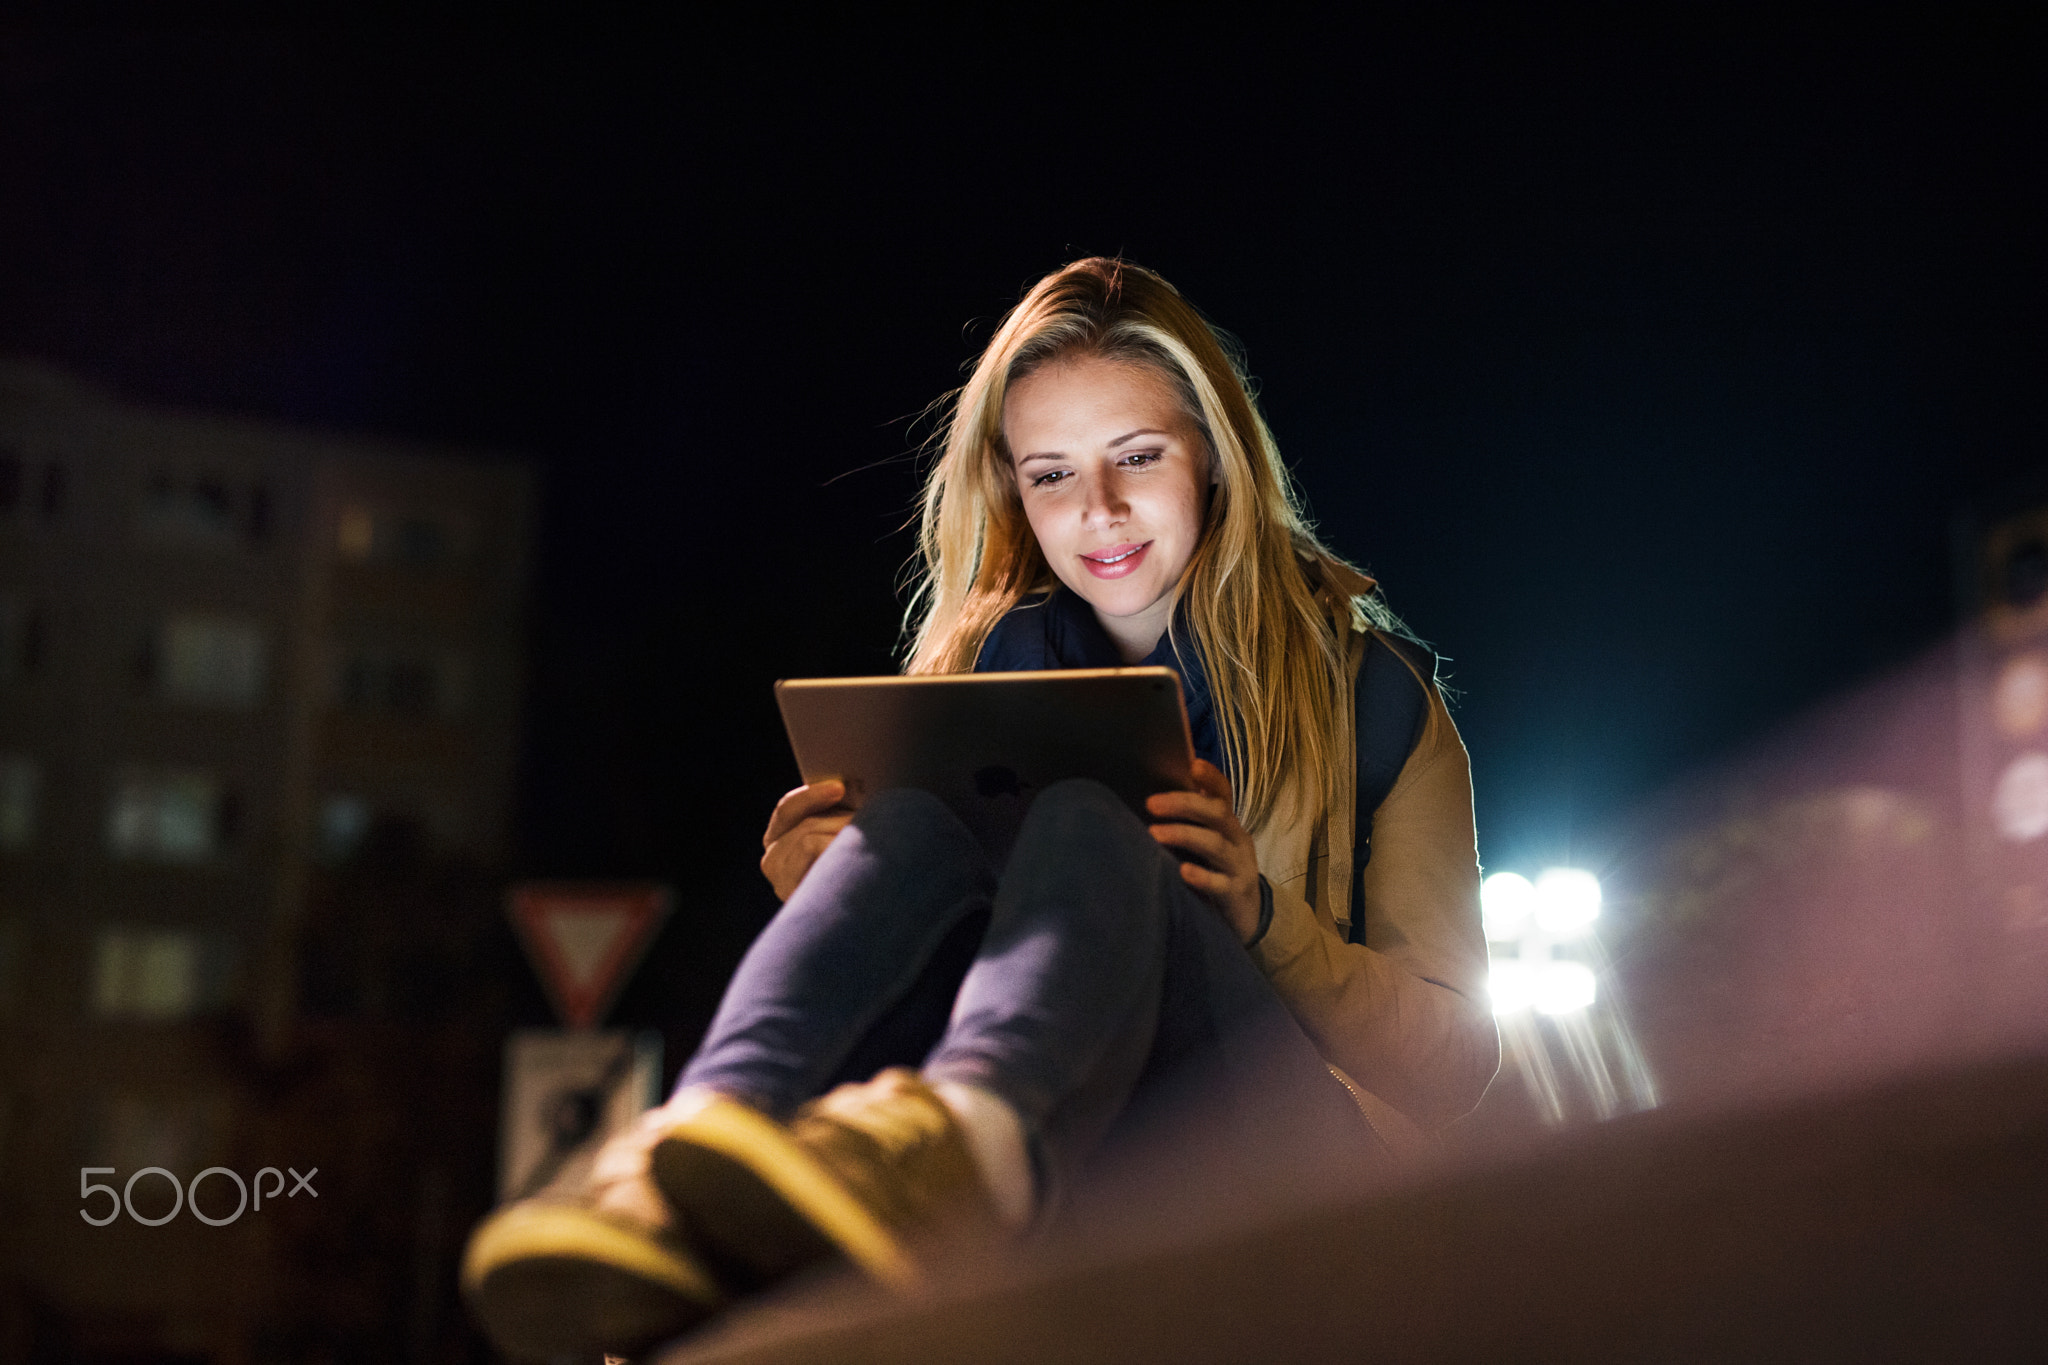 Woman in the city at night holding tablet, reading something.